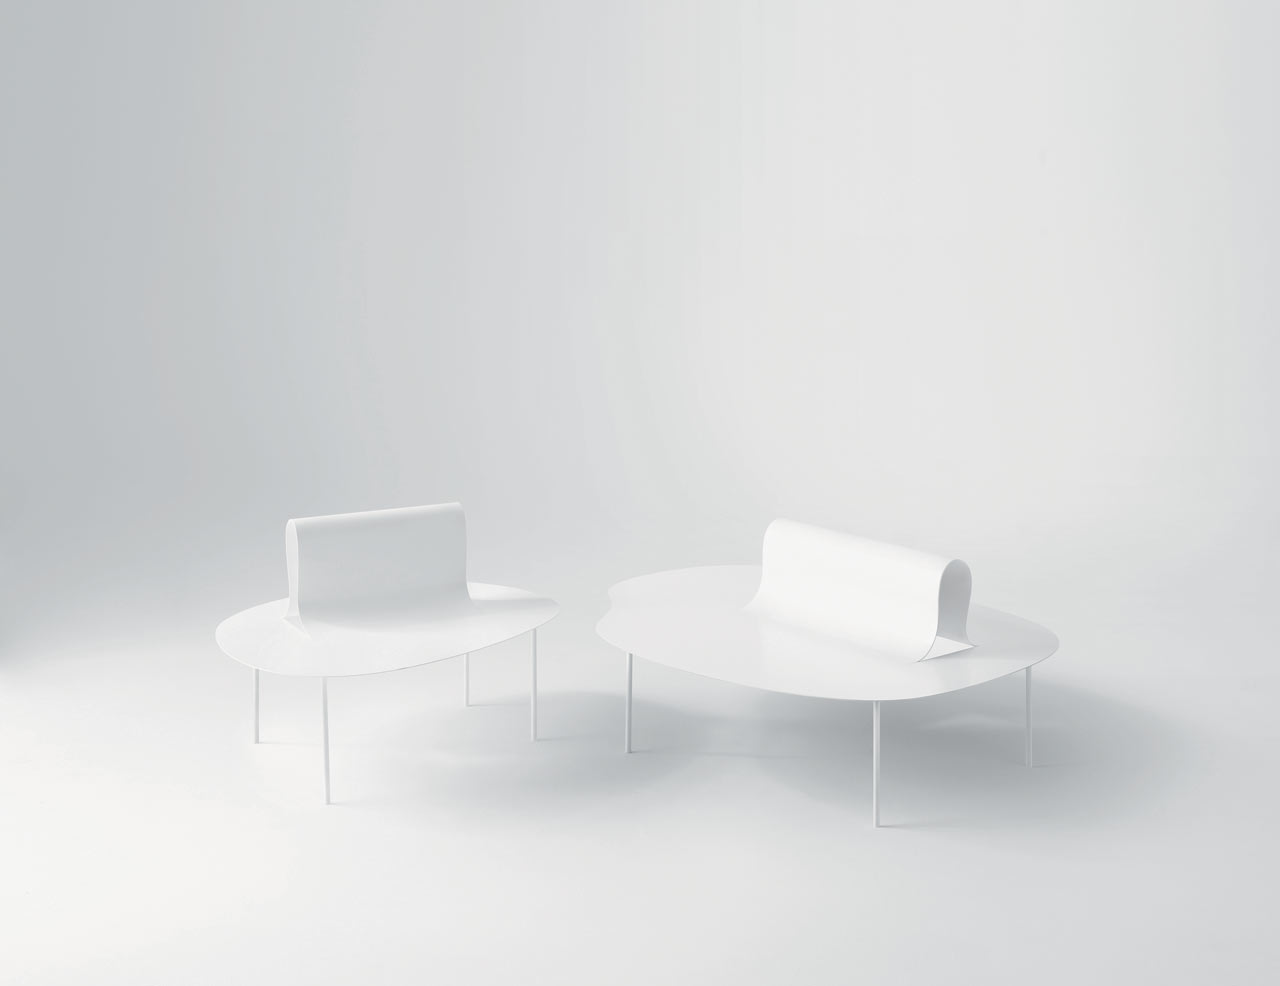 A Furniture Collection That Looks Like It's Softer Than Steel